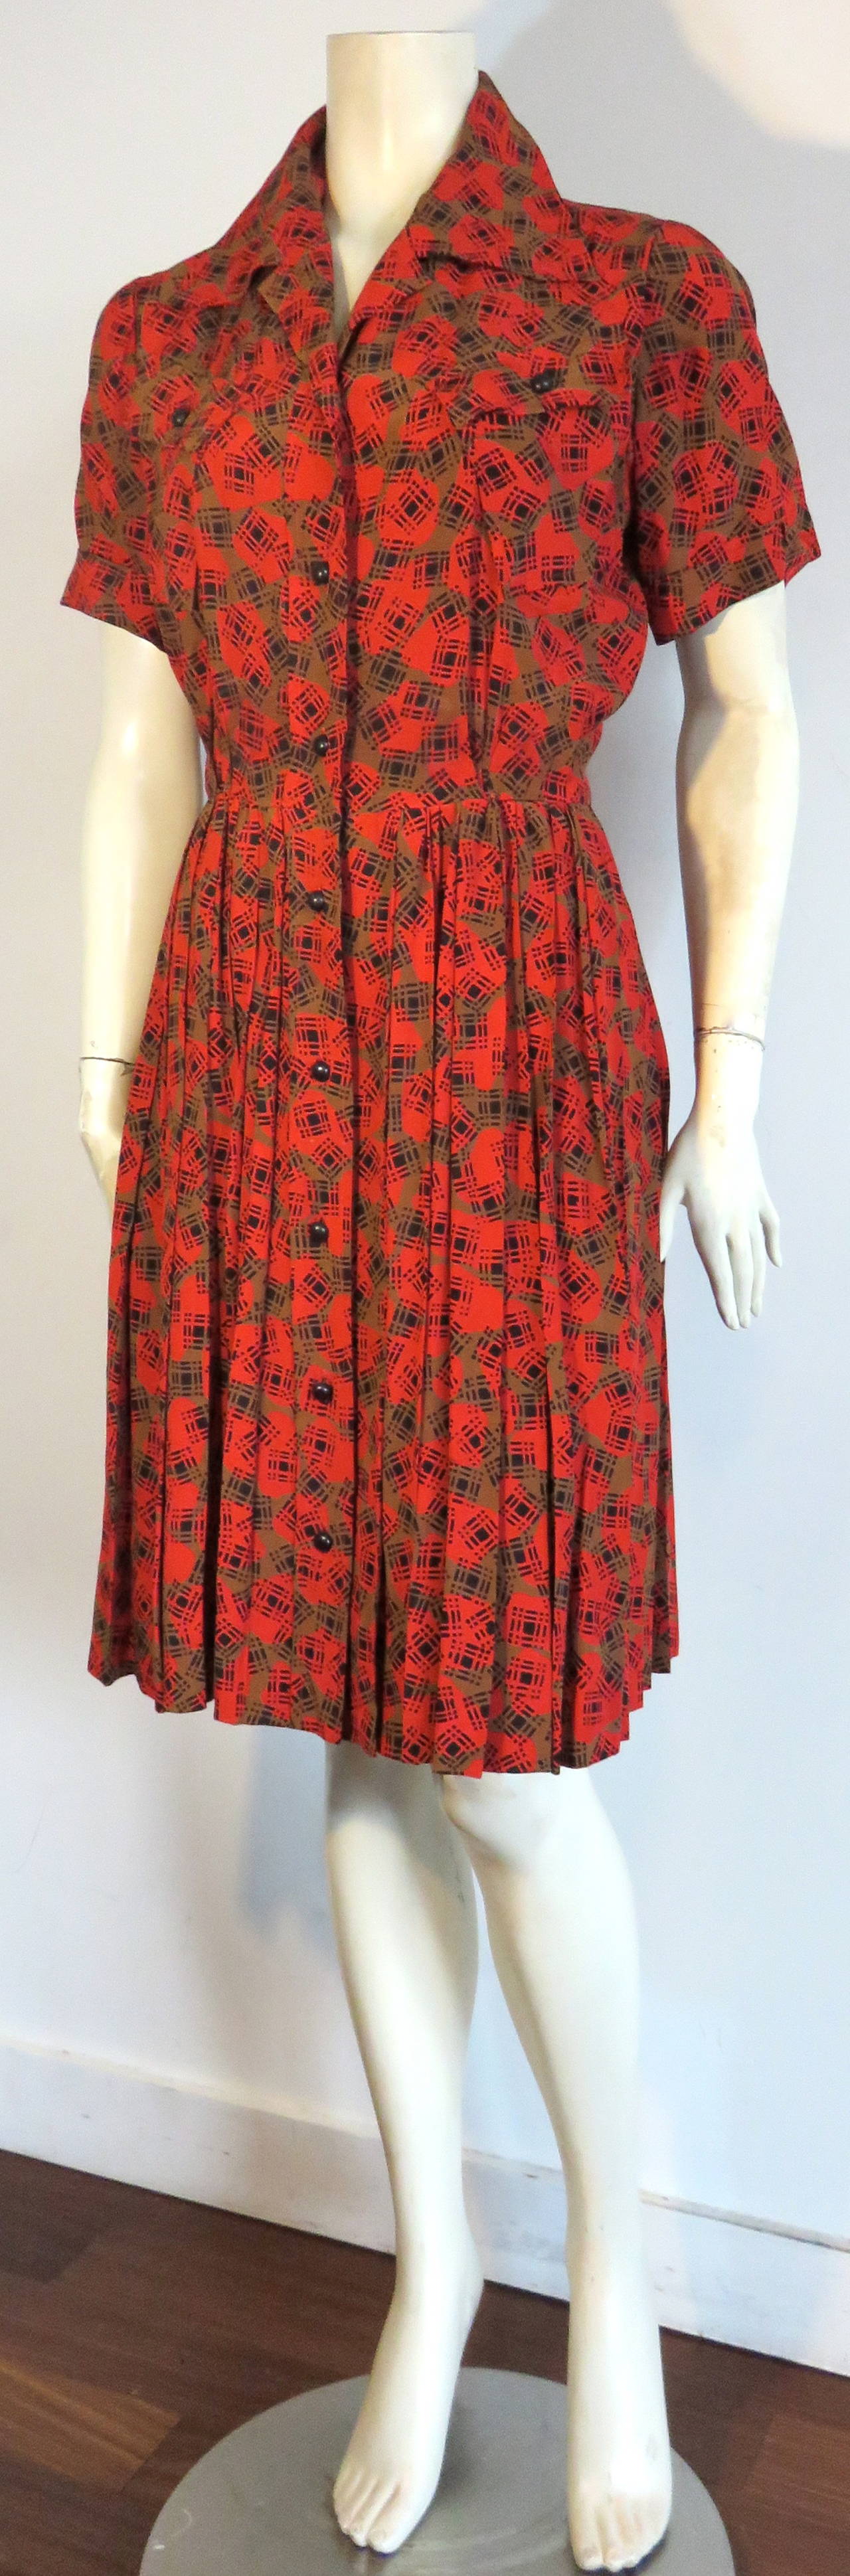 1970's YVES SAINT LAURENTSilk button down day dress.

Red & olive ground print with black grid/check over print motif.

Twin chest pockets.

Pleated bottom skirt with concealed hook and eye closure at the waist opening.

Made in France, as